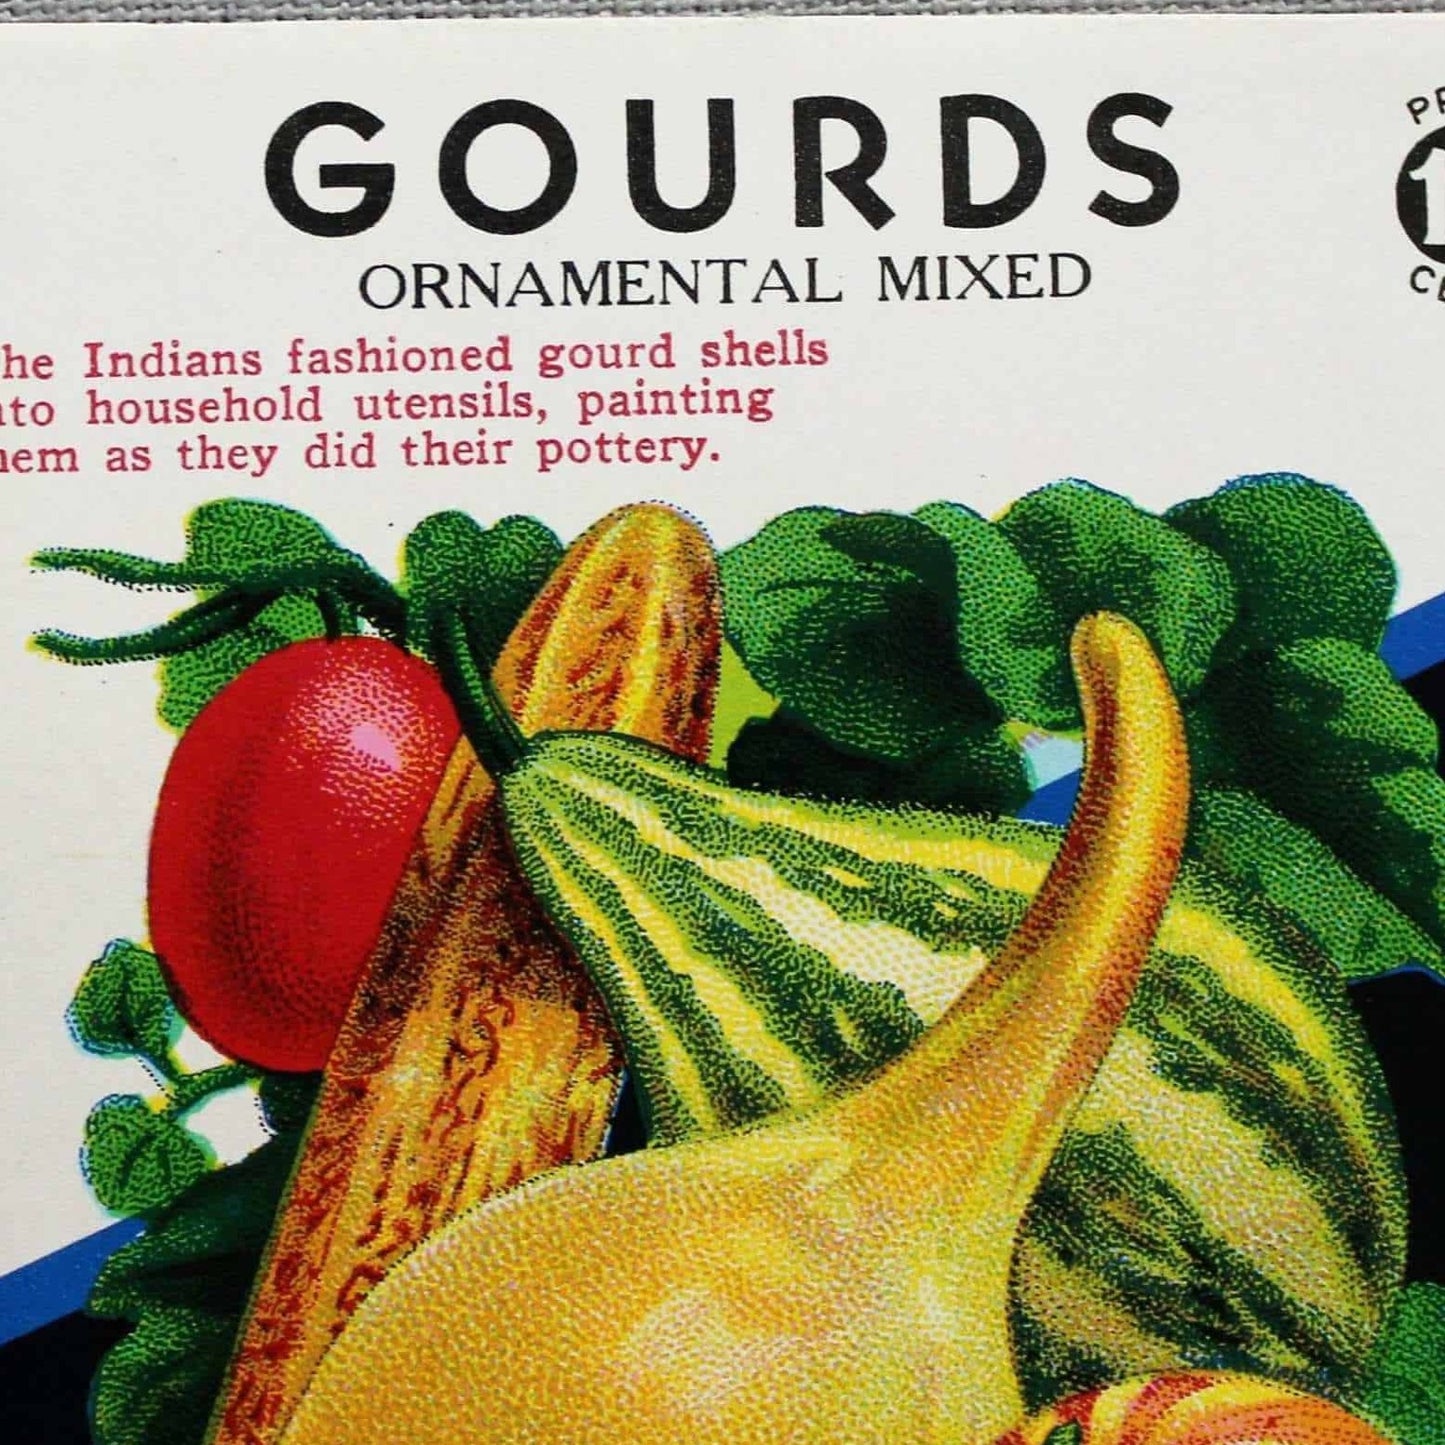 Seed Packets, Lone Star Seed Co, Gourds #546, NOS, Vintage